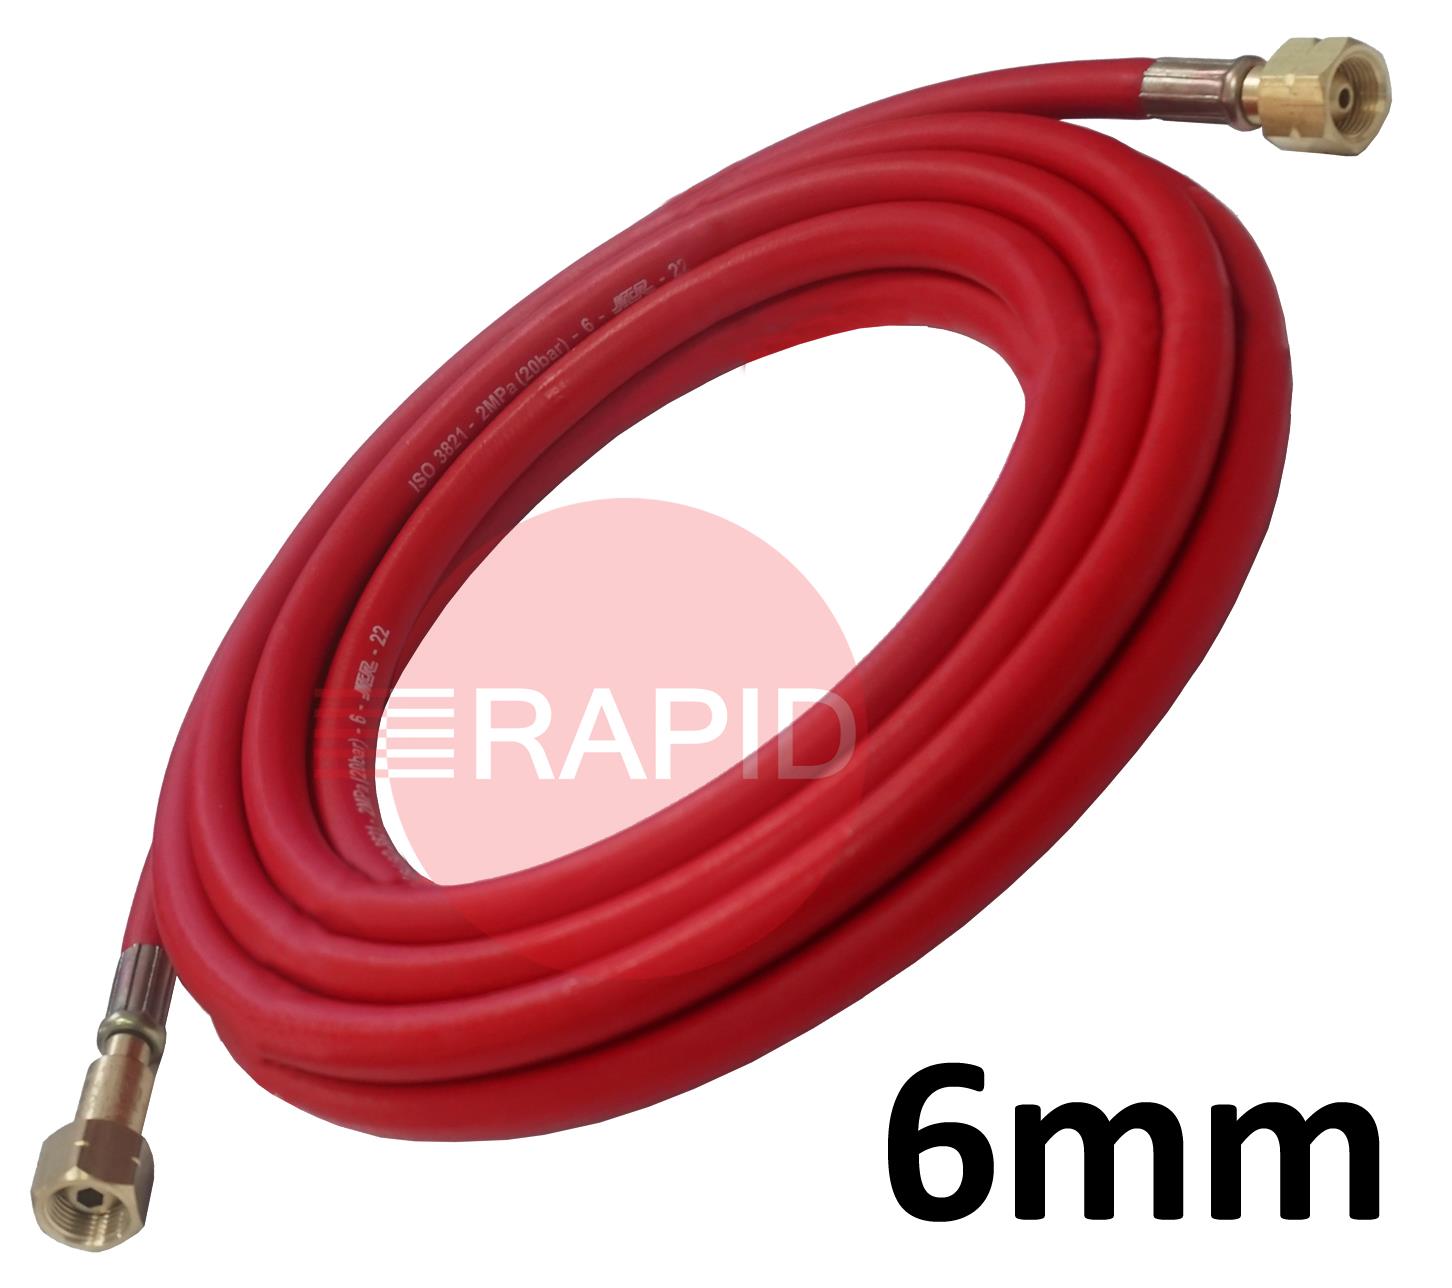 A5125  Fitted Acetylene Hose. 6mm Bore. G3/8 Check Valve & G3/8 Regulator Connection - 20m